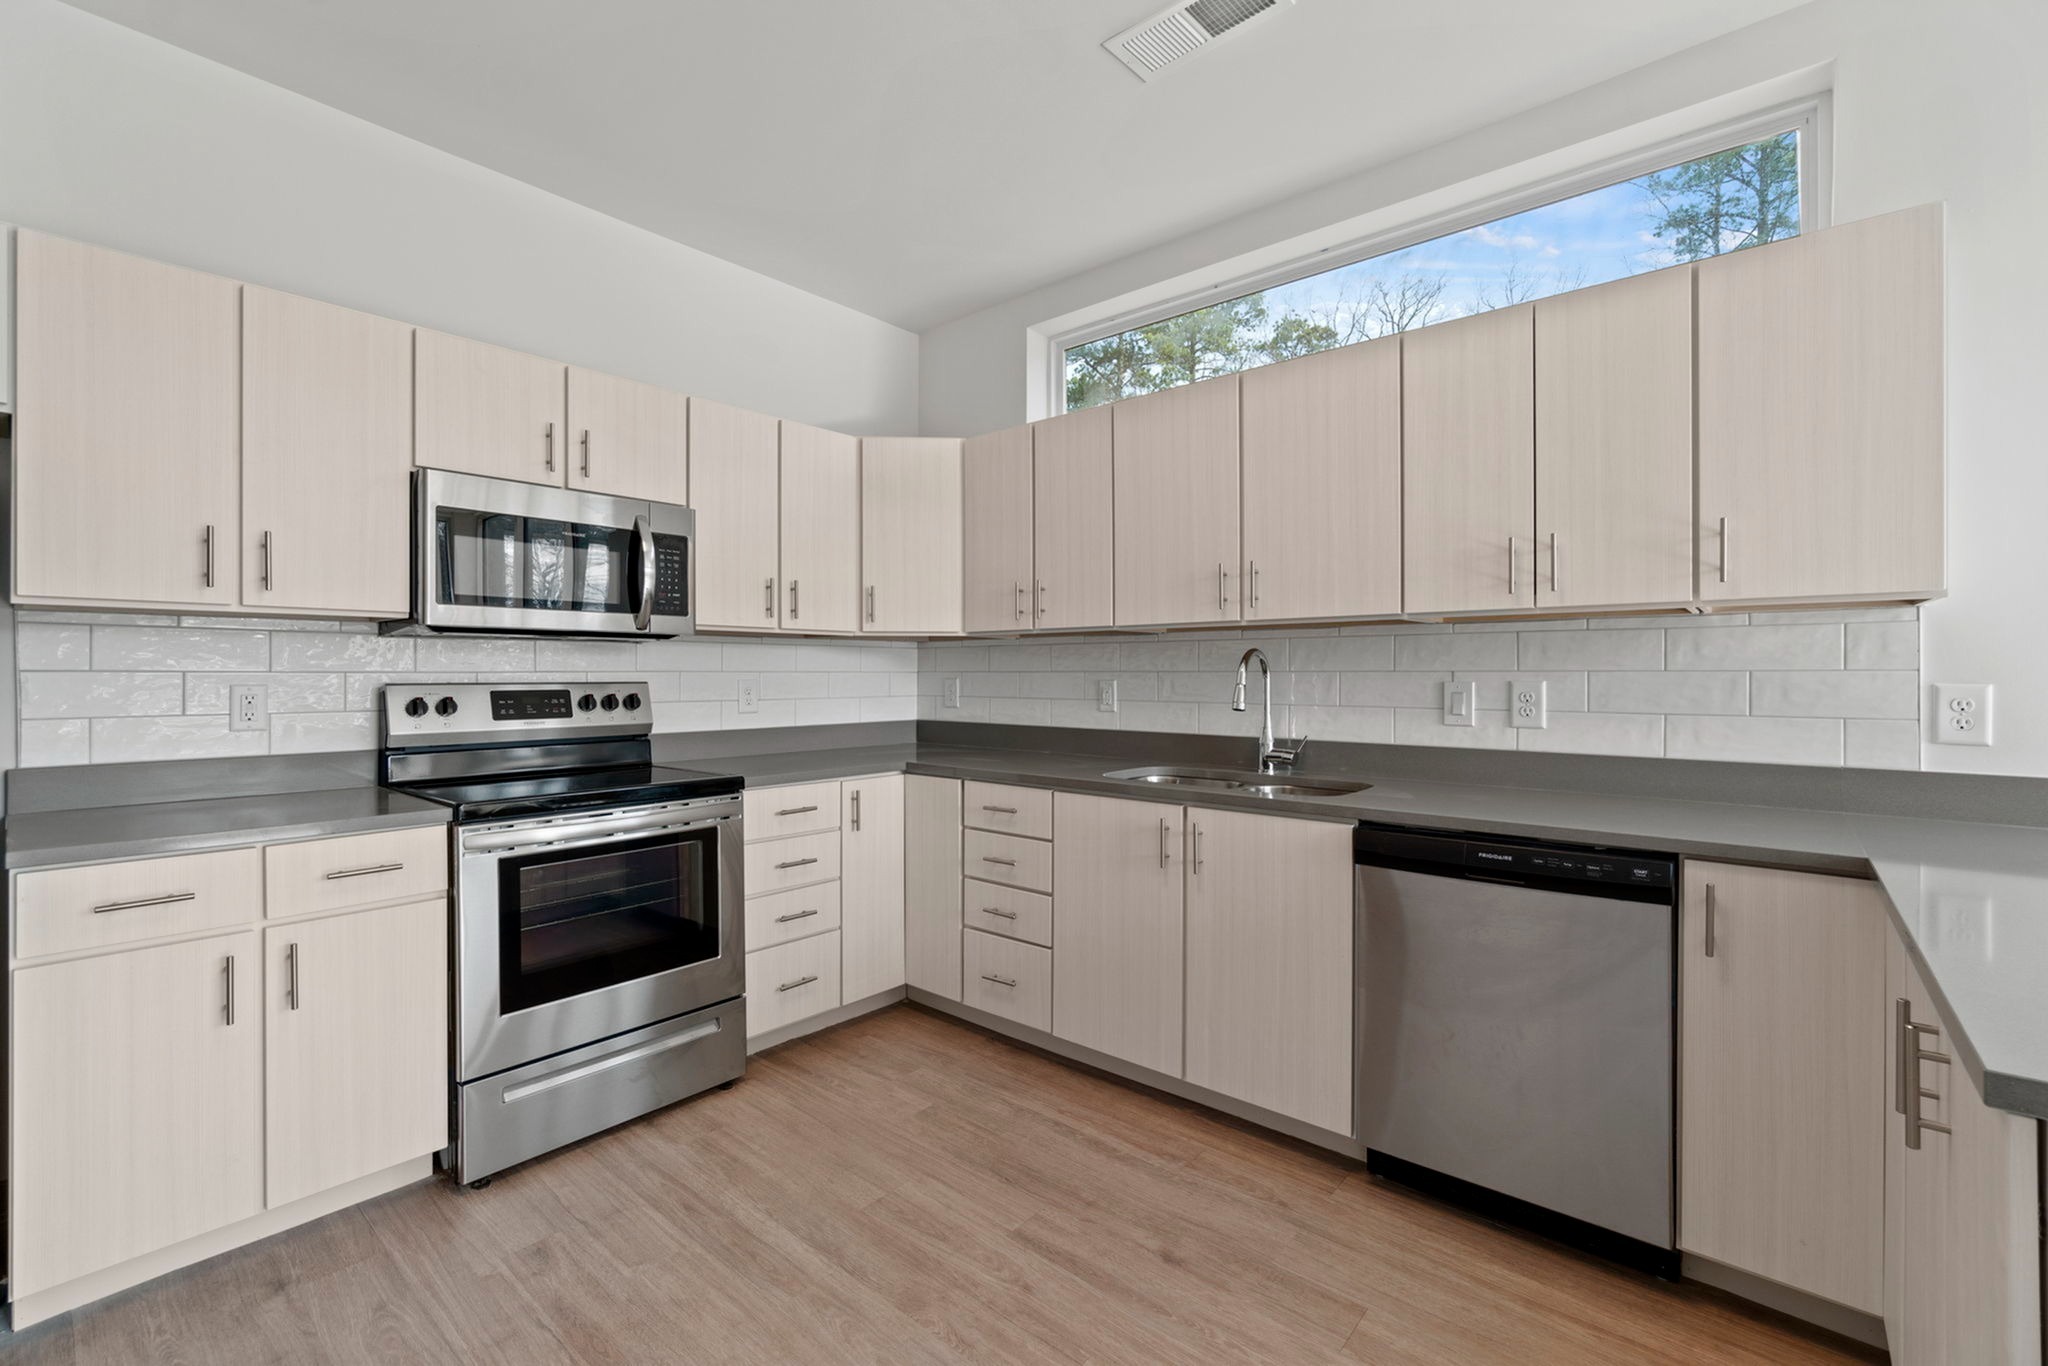 Kitchen with stainless appliances and white cabinets